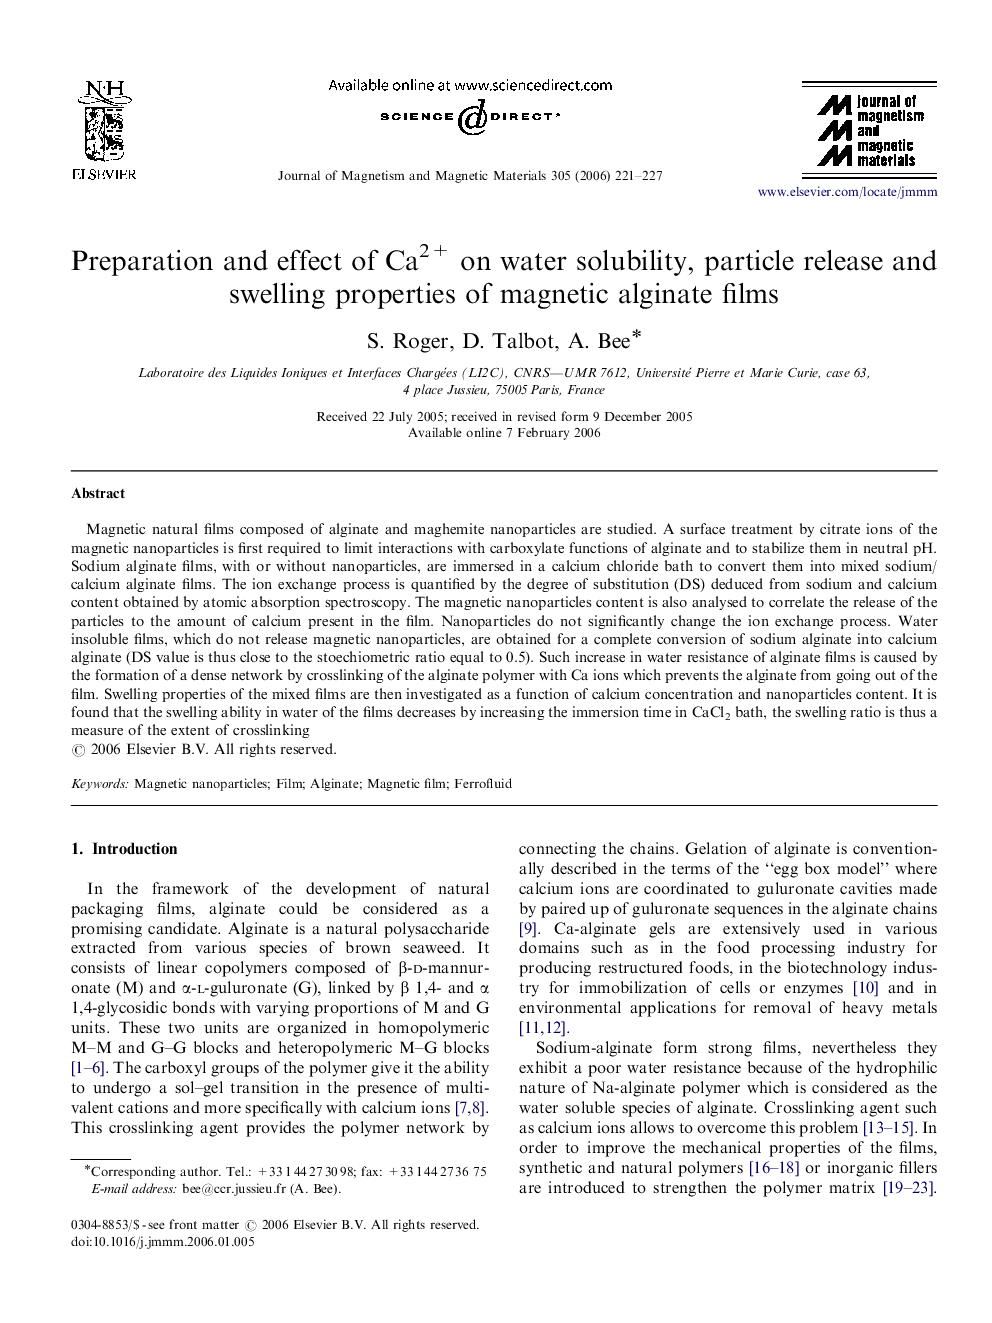 Preparation and effect of Ca2+ on water solubility, particle release and swelling properties of magnetic alginate films